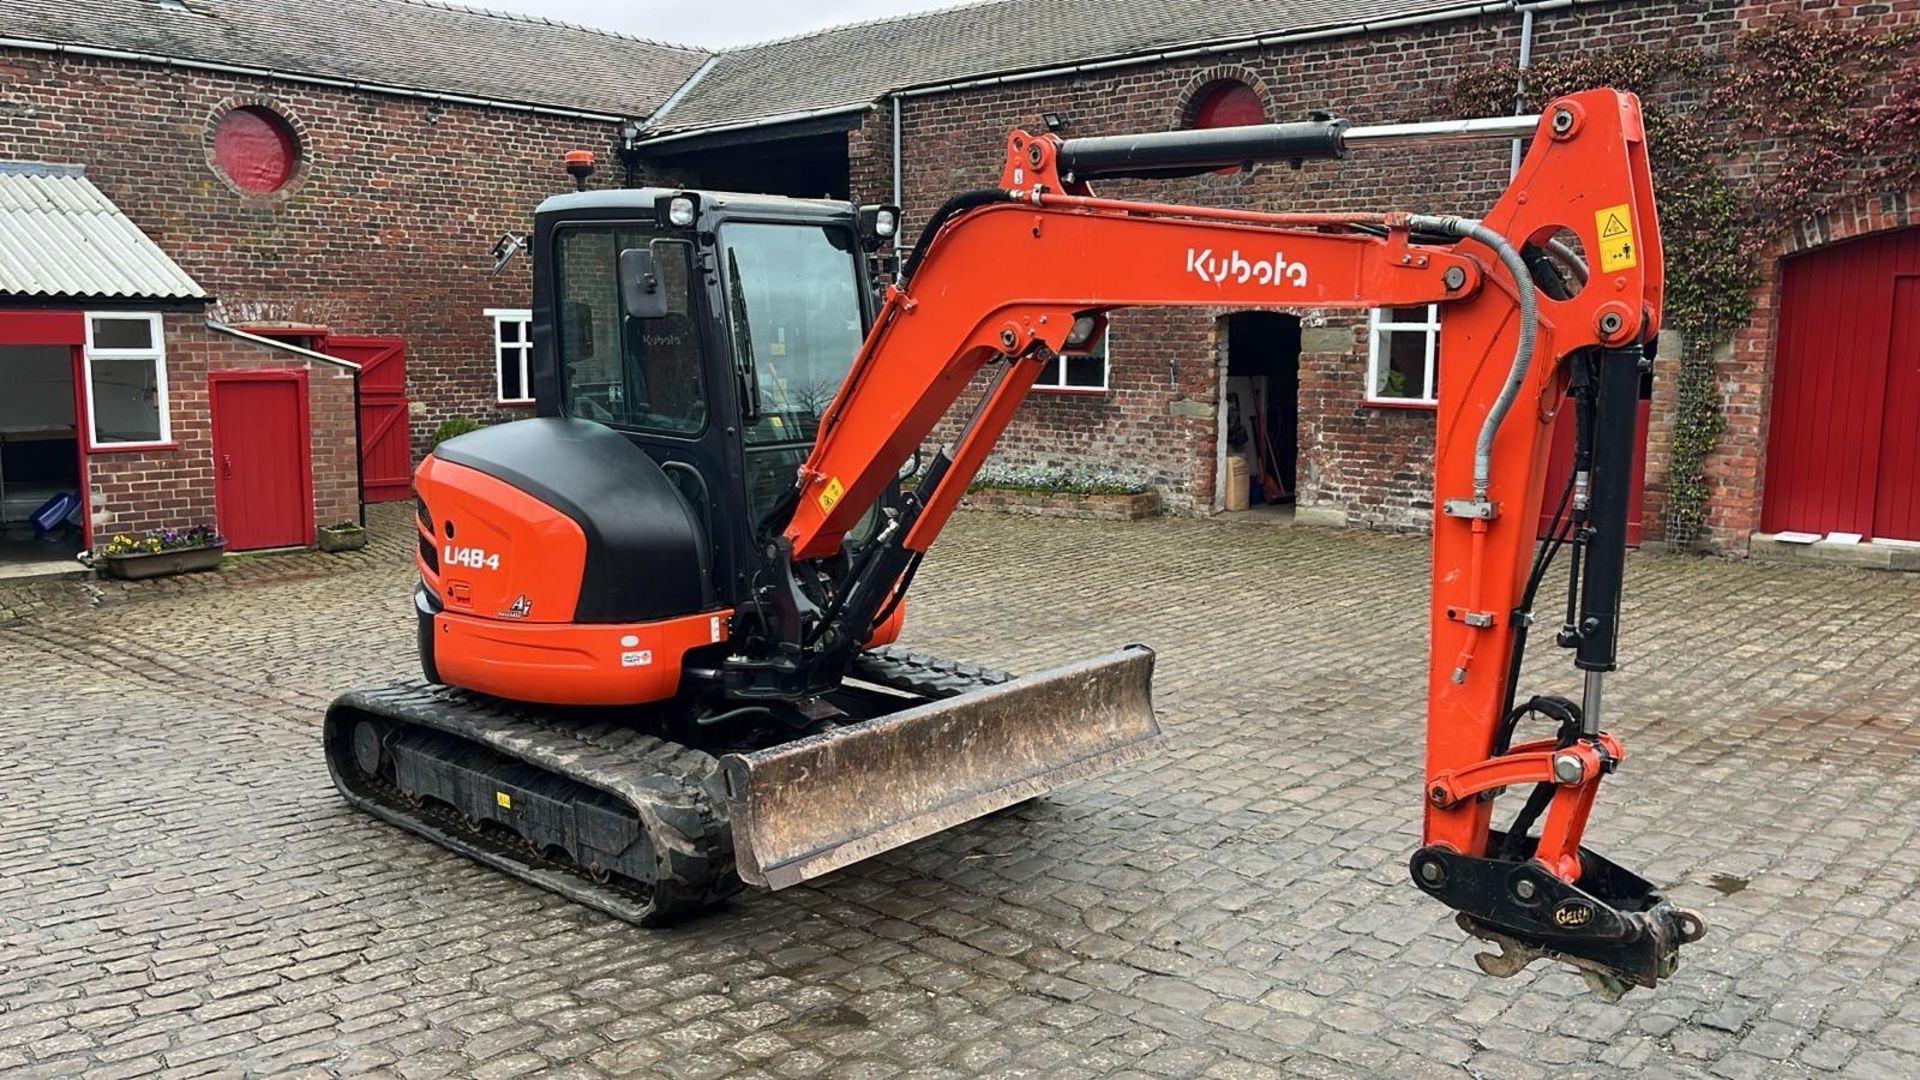 2019 KUBOTA U48-4 COMPACT EXCAVATOR 552 HOURS WITH HYDRAULIC QUICK HITCH TO BE SOLD WITH 4 BUCKETS